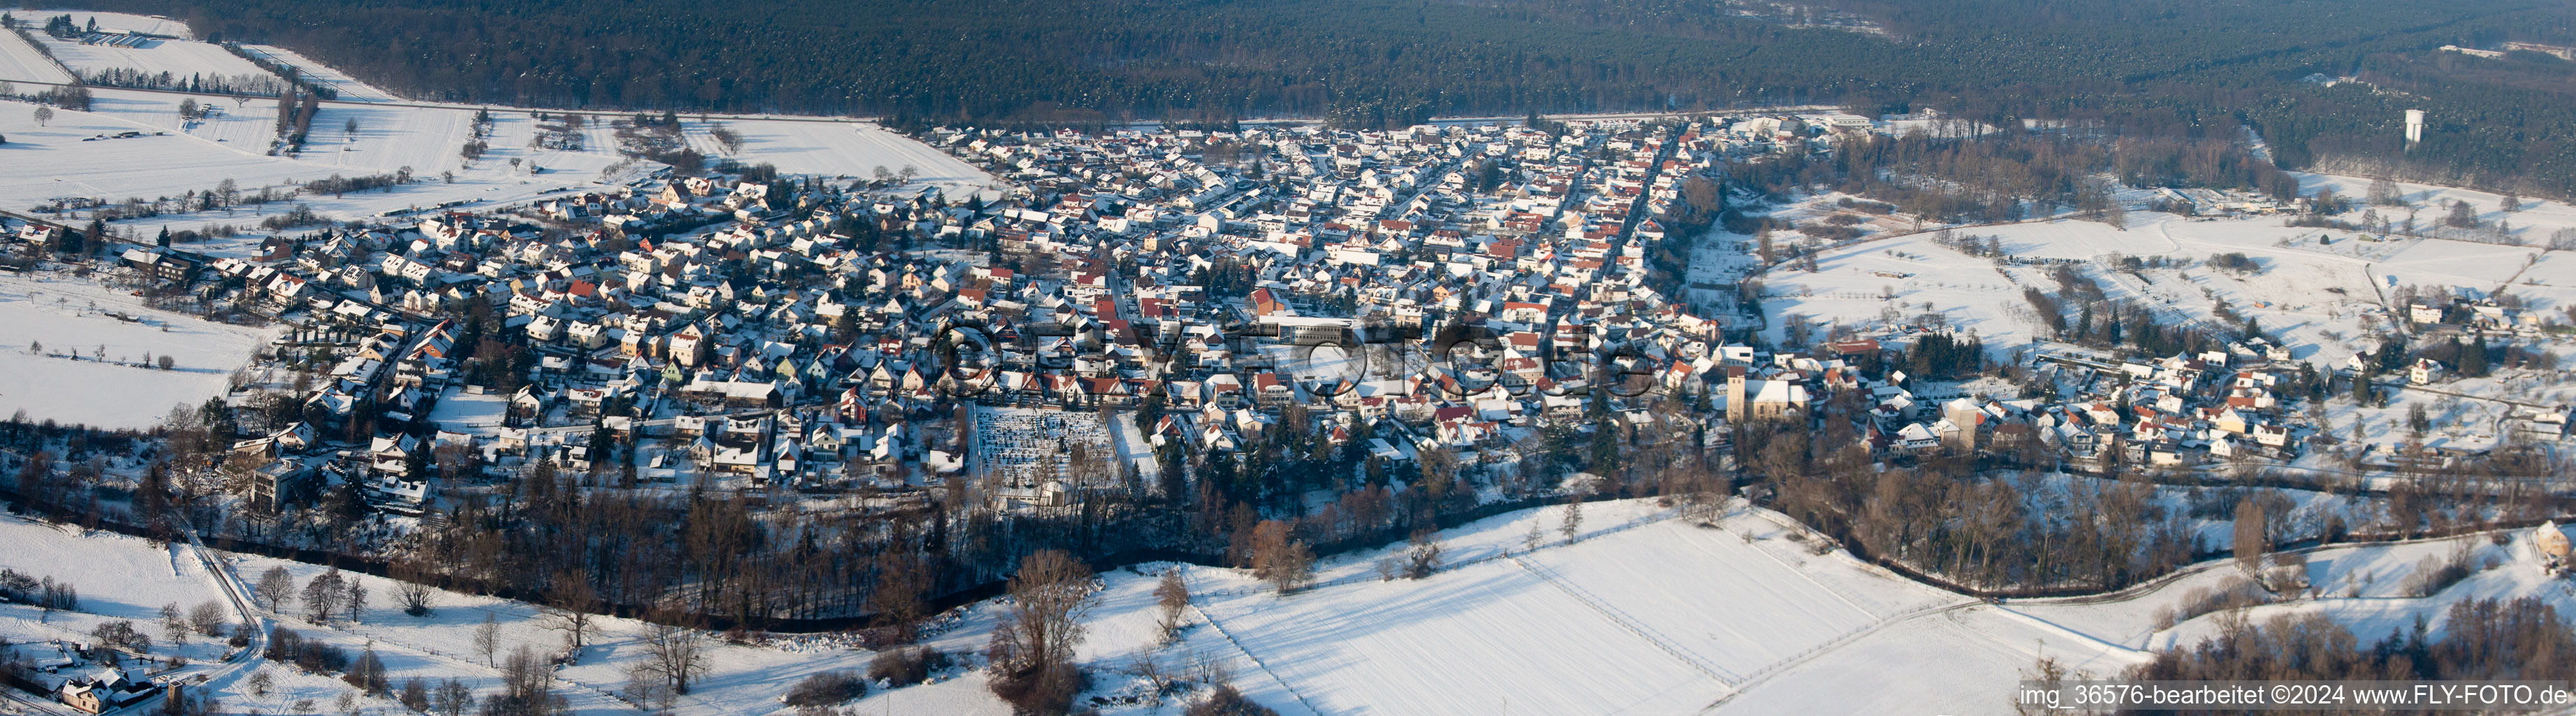 Wintry snowy Panorama from the local area and environment in Berg (Pfalz) in the state Rhineland-Palatinate